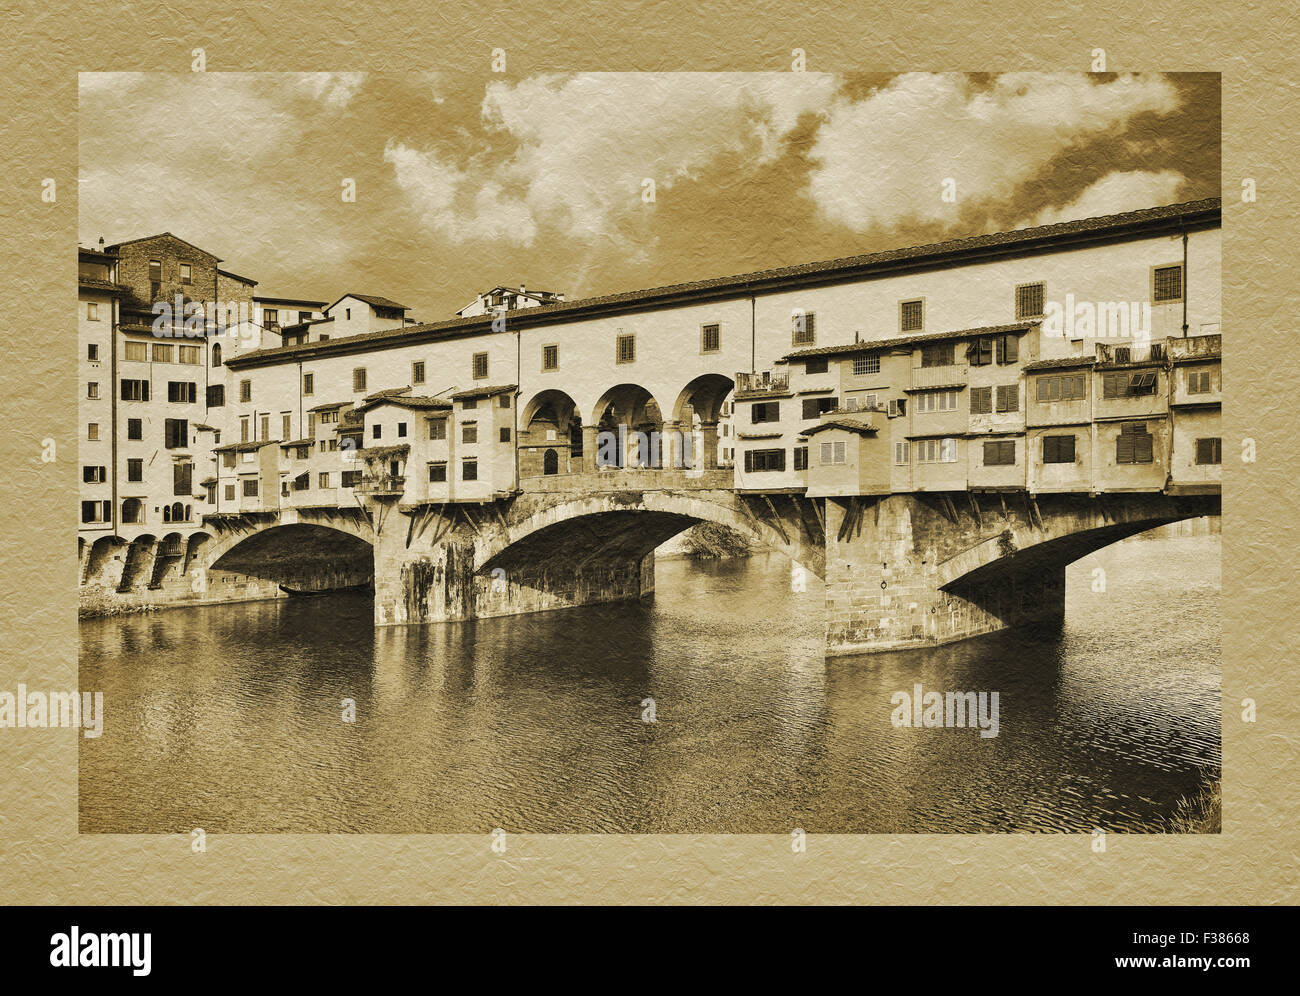 View over the River Arno to the Bridge Ponte Veccchio, Florence, Tuscany, Central Italy, Italy, Europe Stock Photo